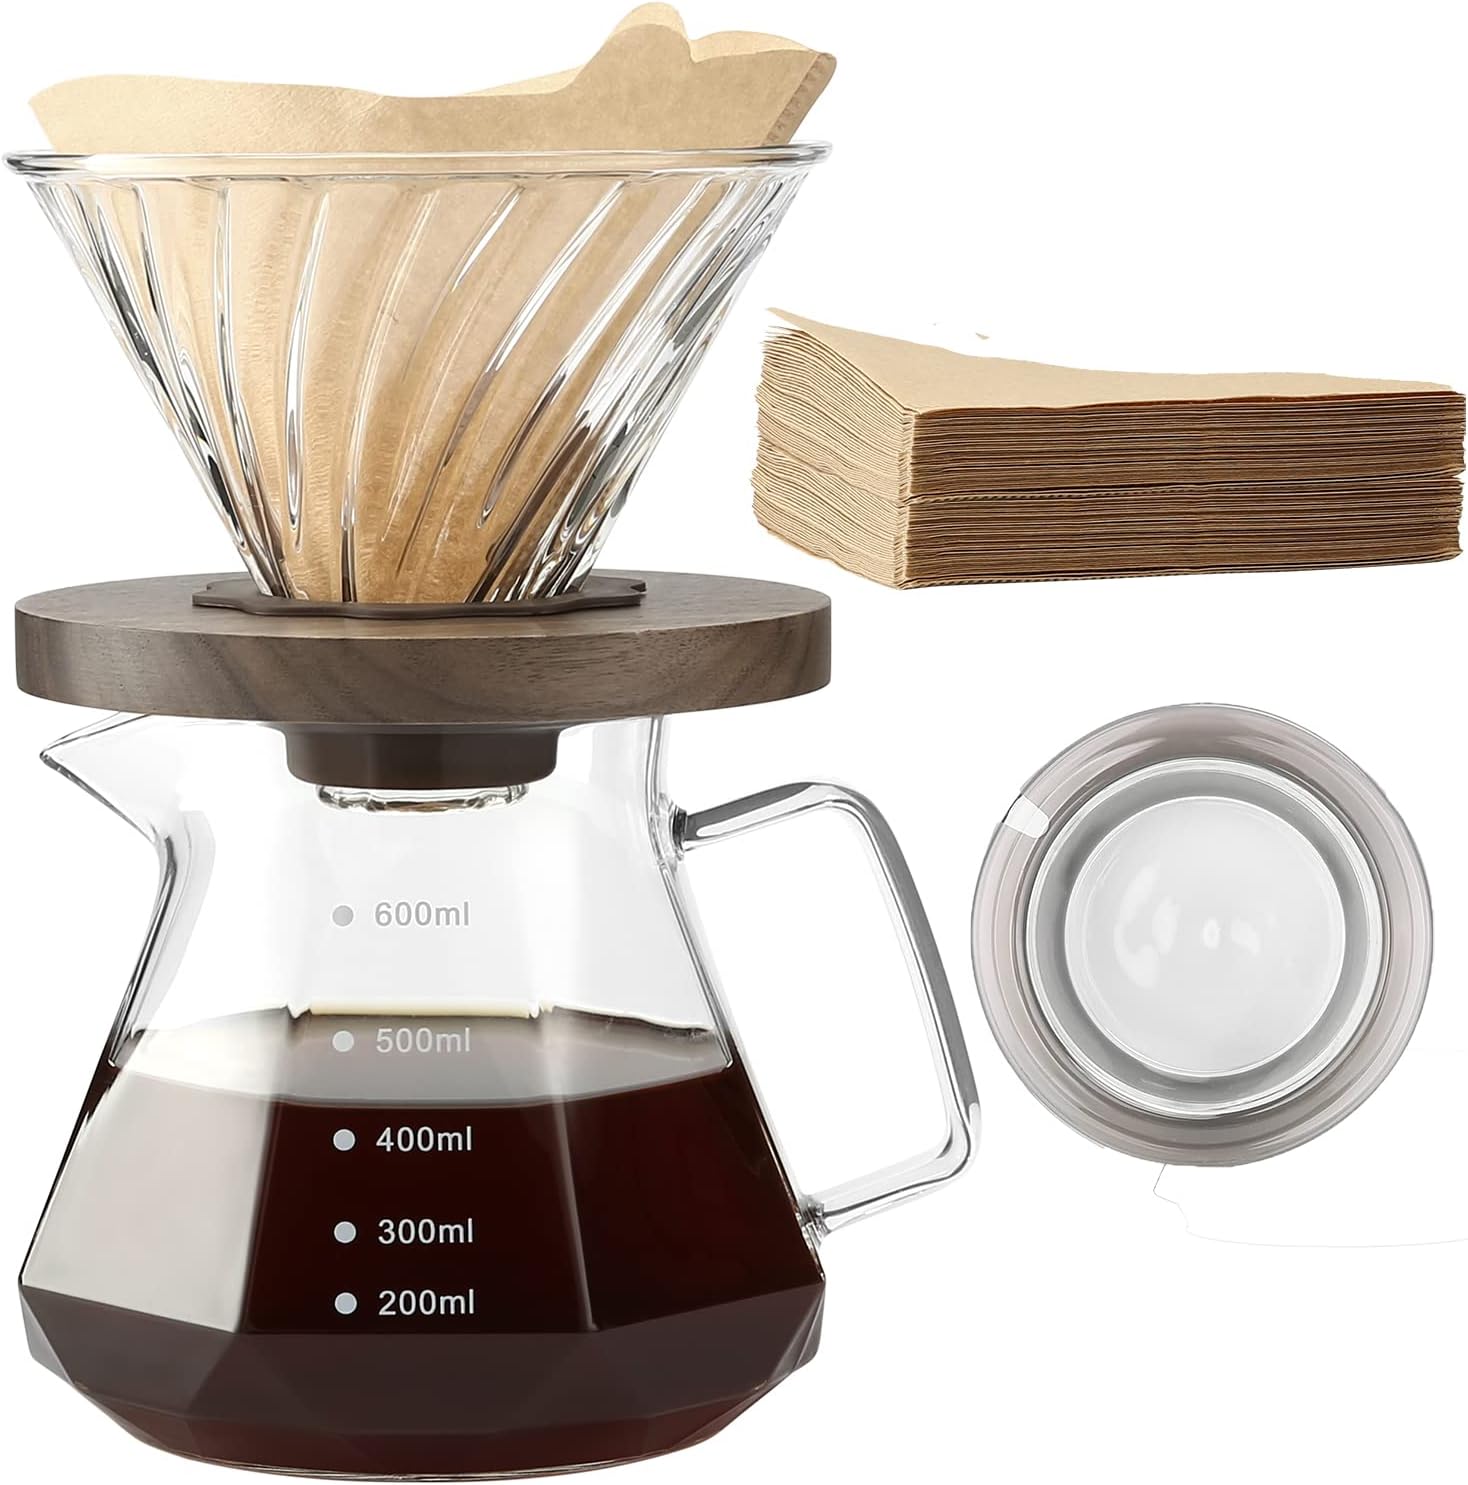 Lalord Pour Over Coffee Maker - 600ml Borosilicate Glass Carafe Set with V60 Paper Filter, 80 Pieces, Walnut Handle and Coffee Pot Lid, Drip Coffee Machine, Perfect for 1-3 People